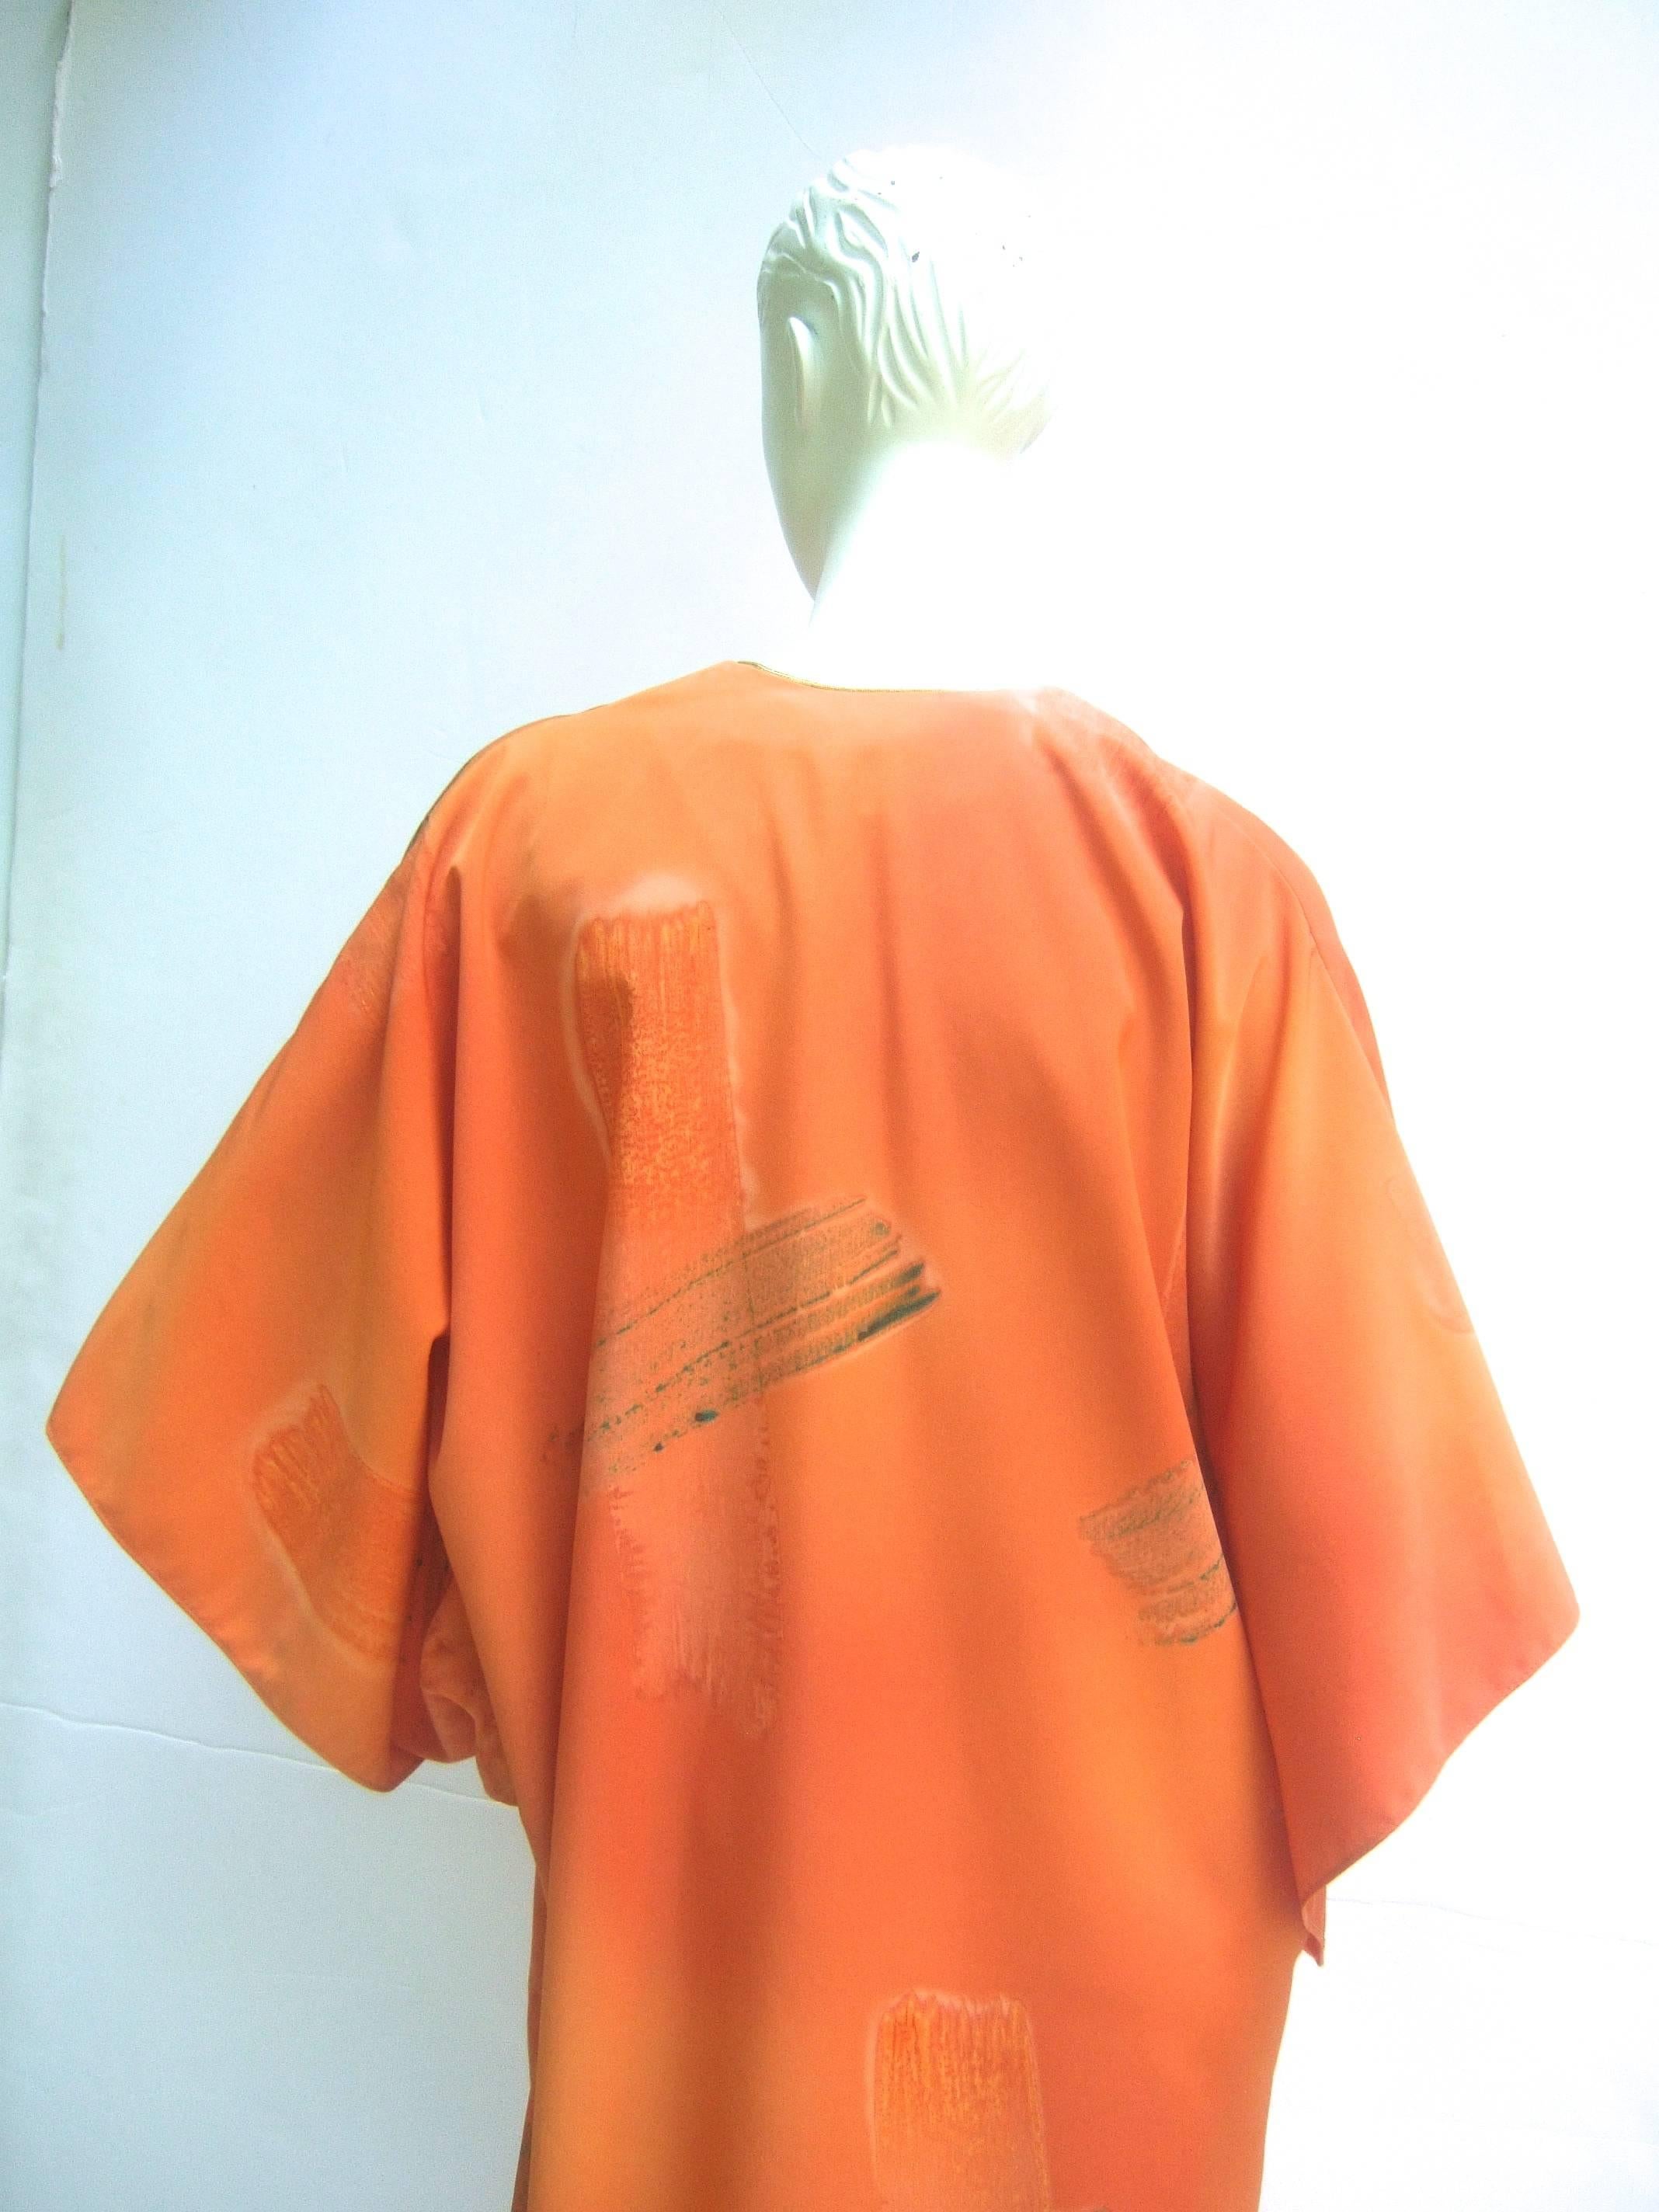 Reserved Sale Pending Chic Tangerine Caftan Lounge Gown for Neiman Marcus c 1990 4